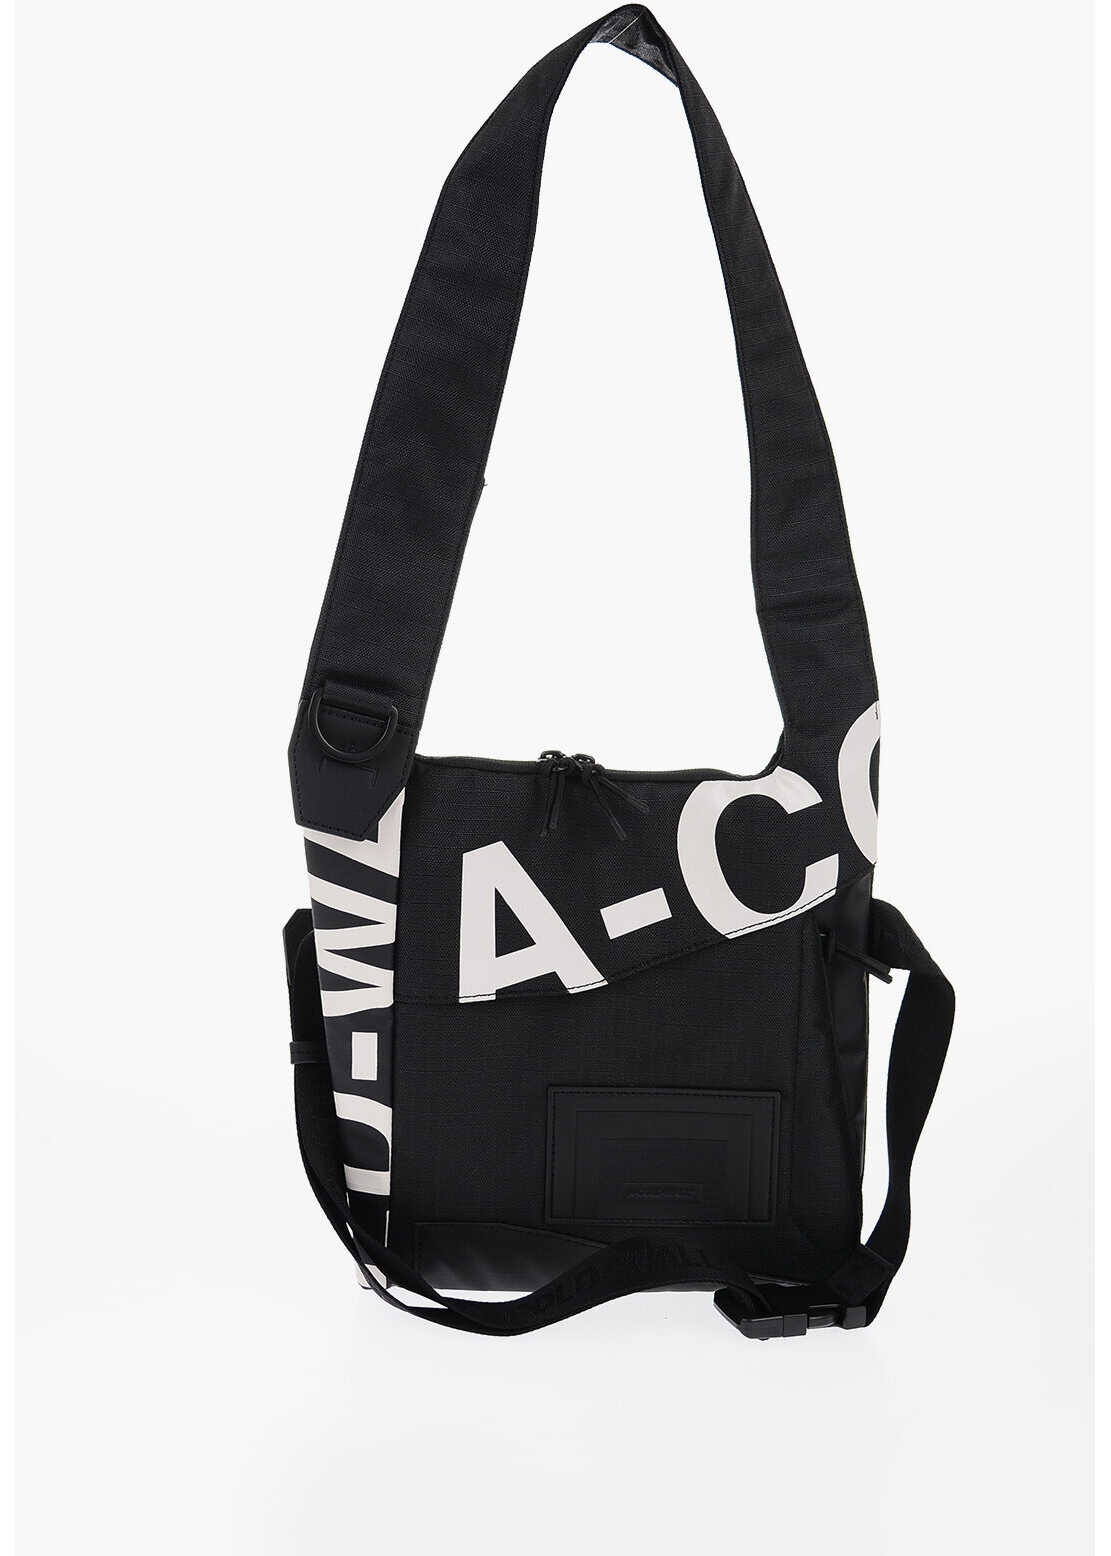 A-COLD-WALL* Double-Portability Bag With Logoed Details Black